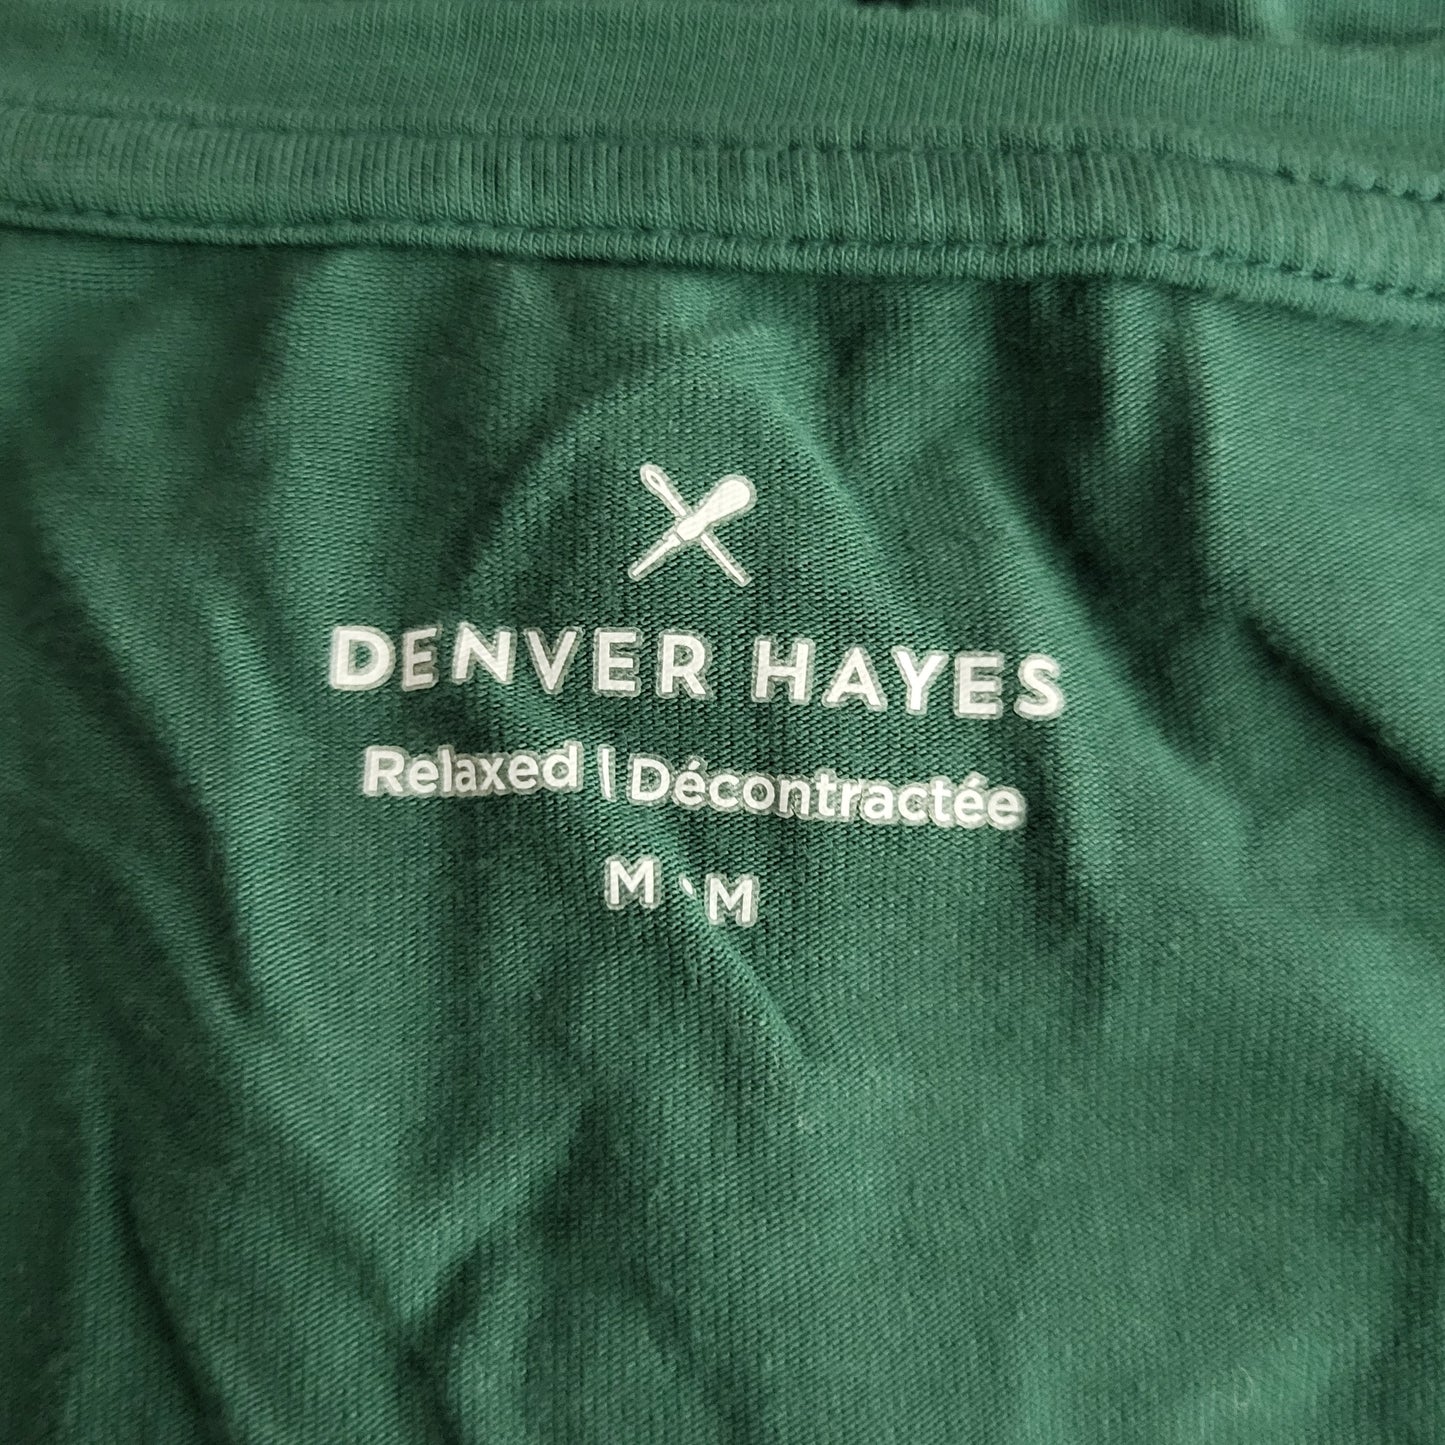 CHND2 - Denver Hayes forest green relaxed fit tank top, size medium, good condition